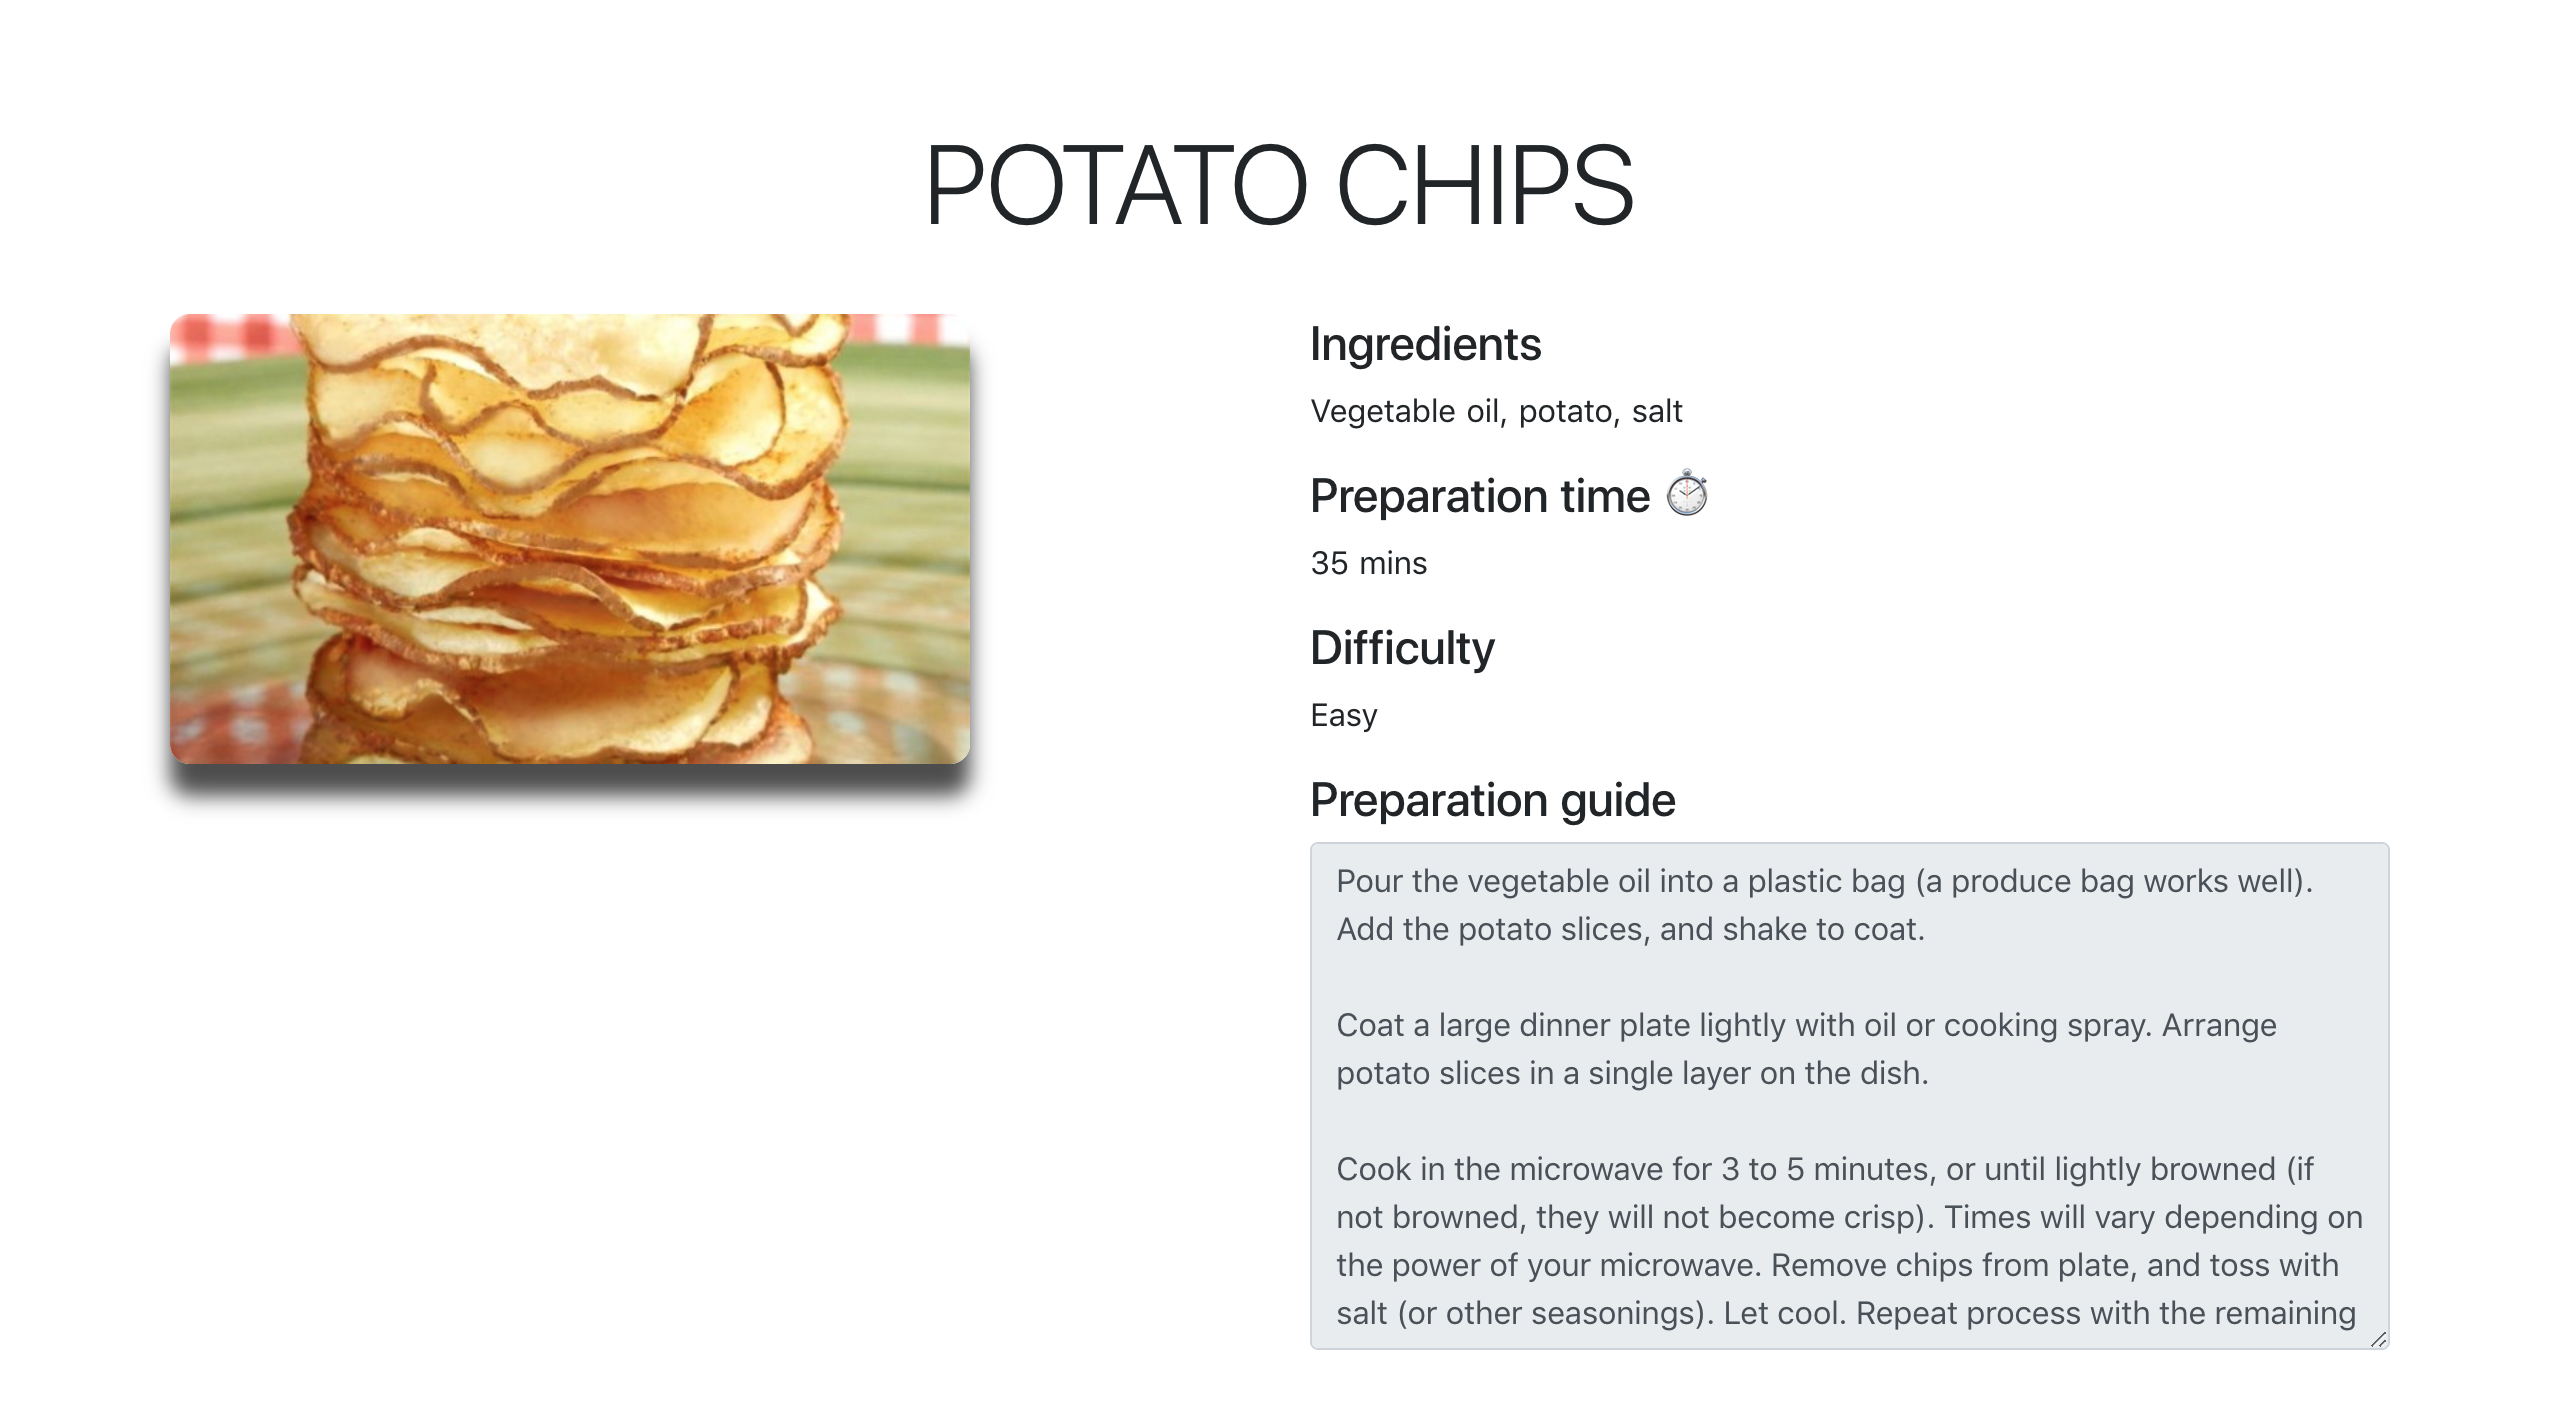 Single recipe item potato chips. With ingredients, prep time, difficulty, and prep guide